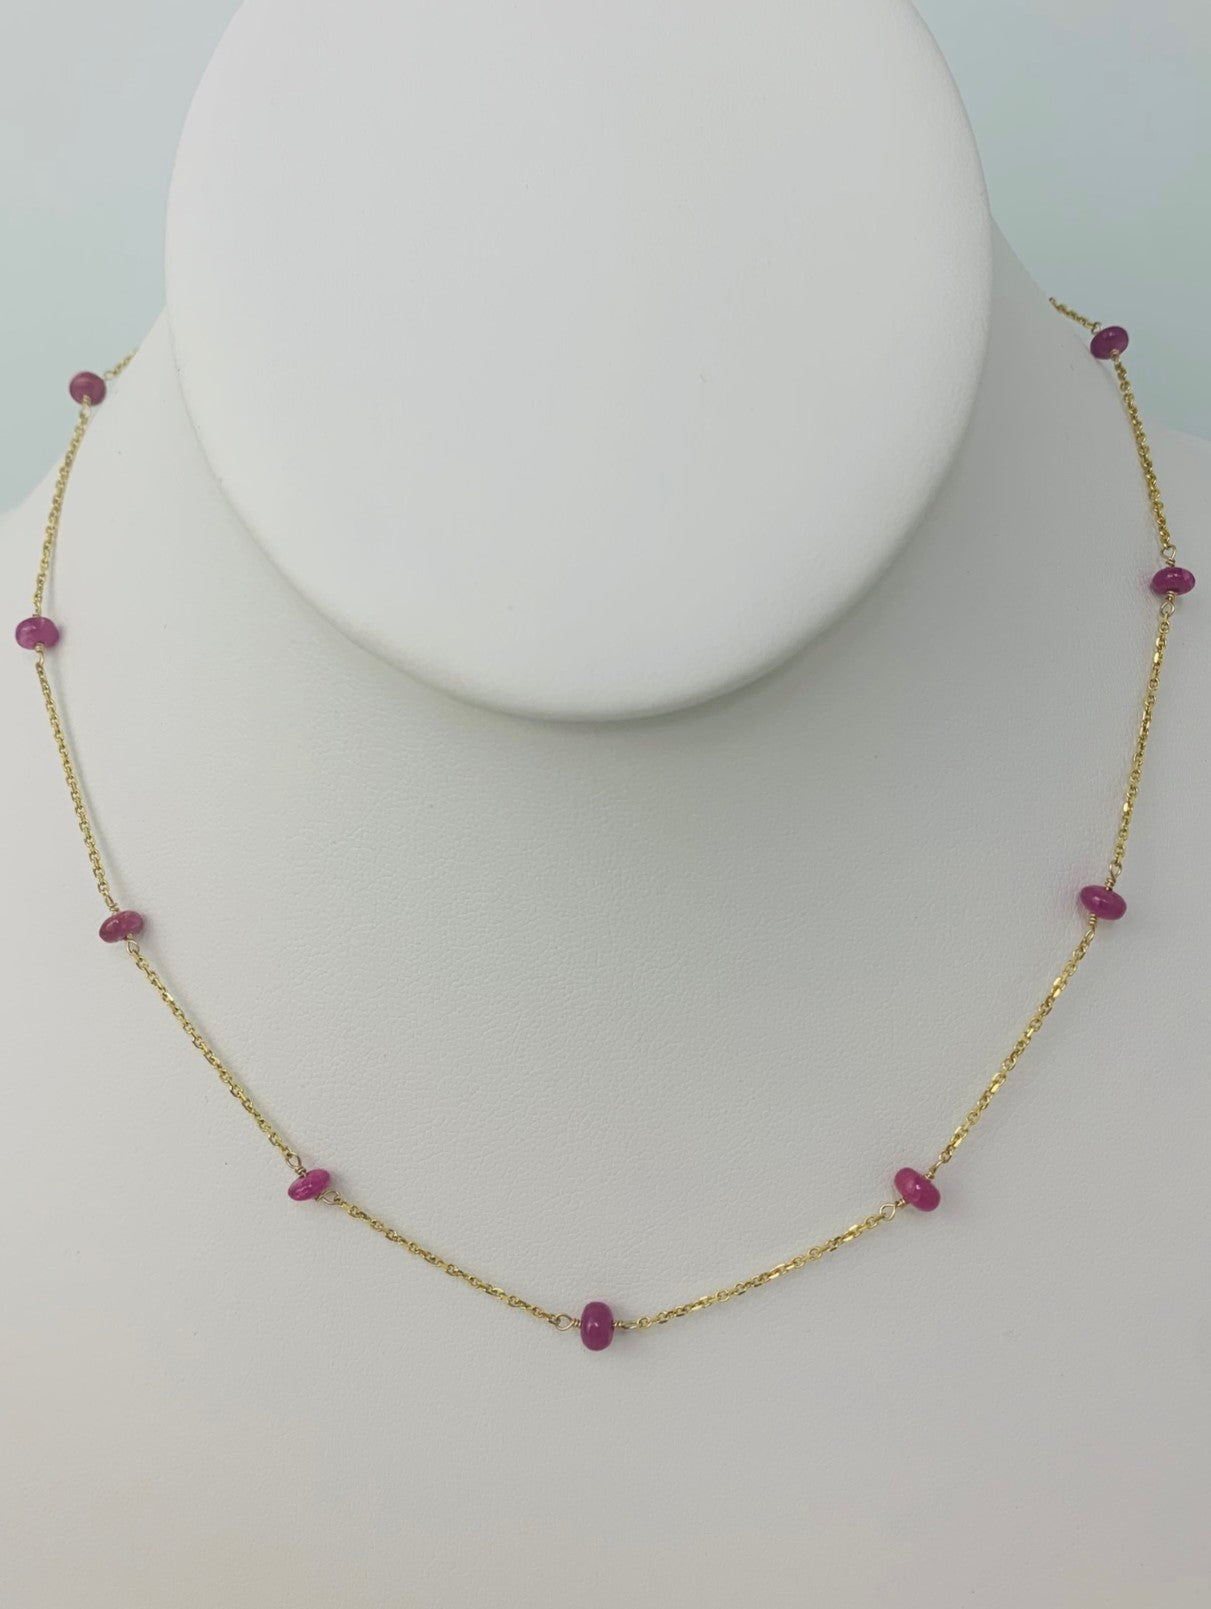 16" Ruby Station Necklace in 14KY - NCK-145-TNCGM14Y-RBY-16